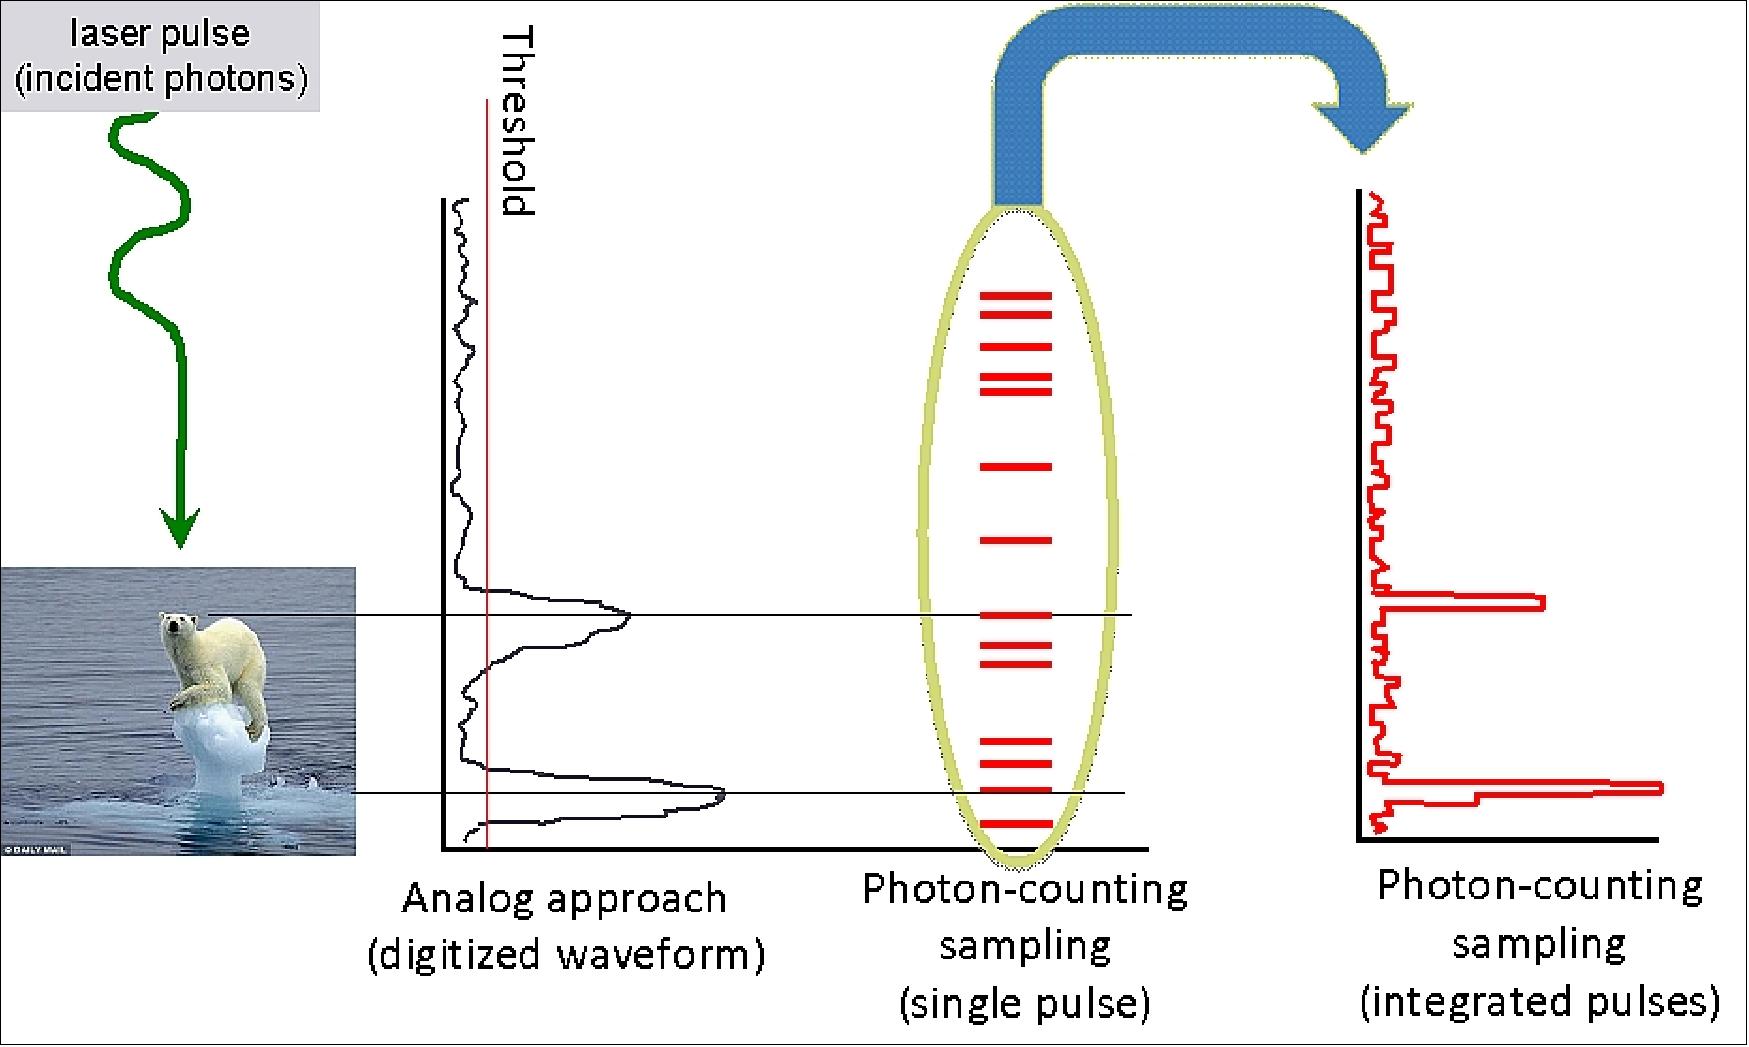 Figure 61: Schematic of analog versus photon counting (image credit: NASA)